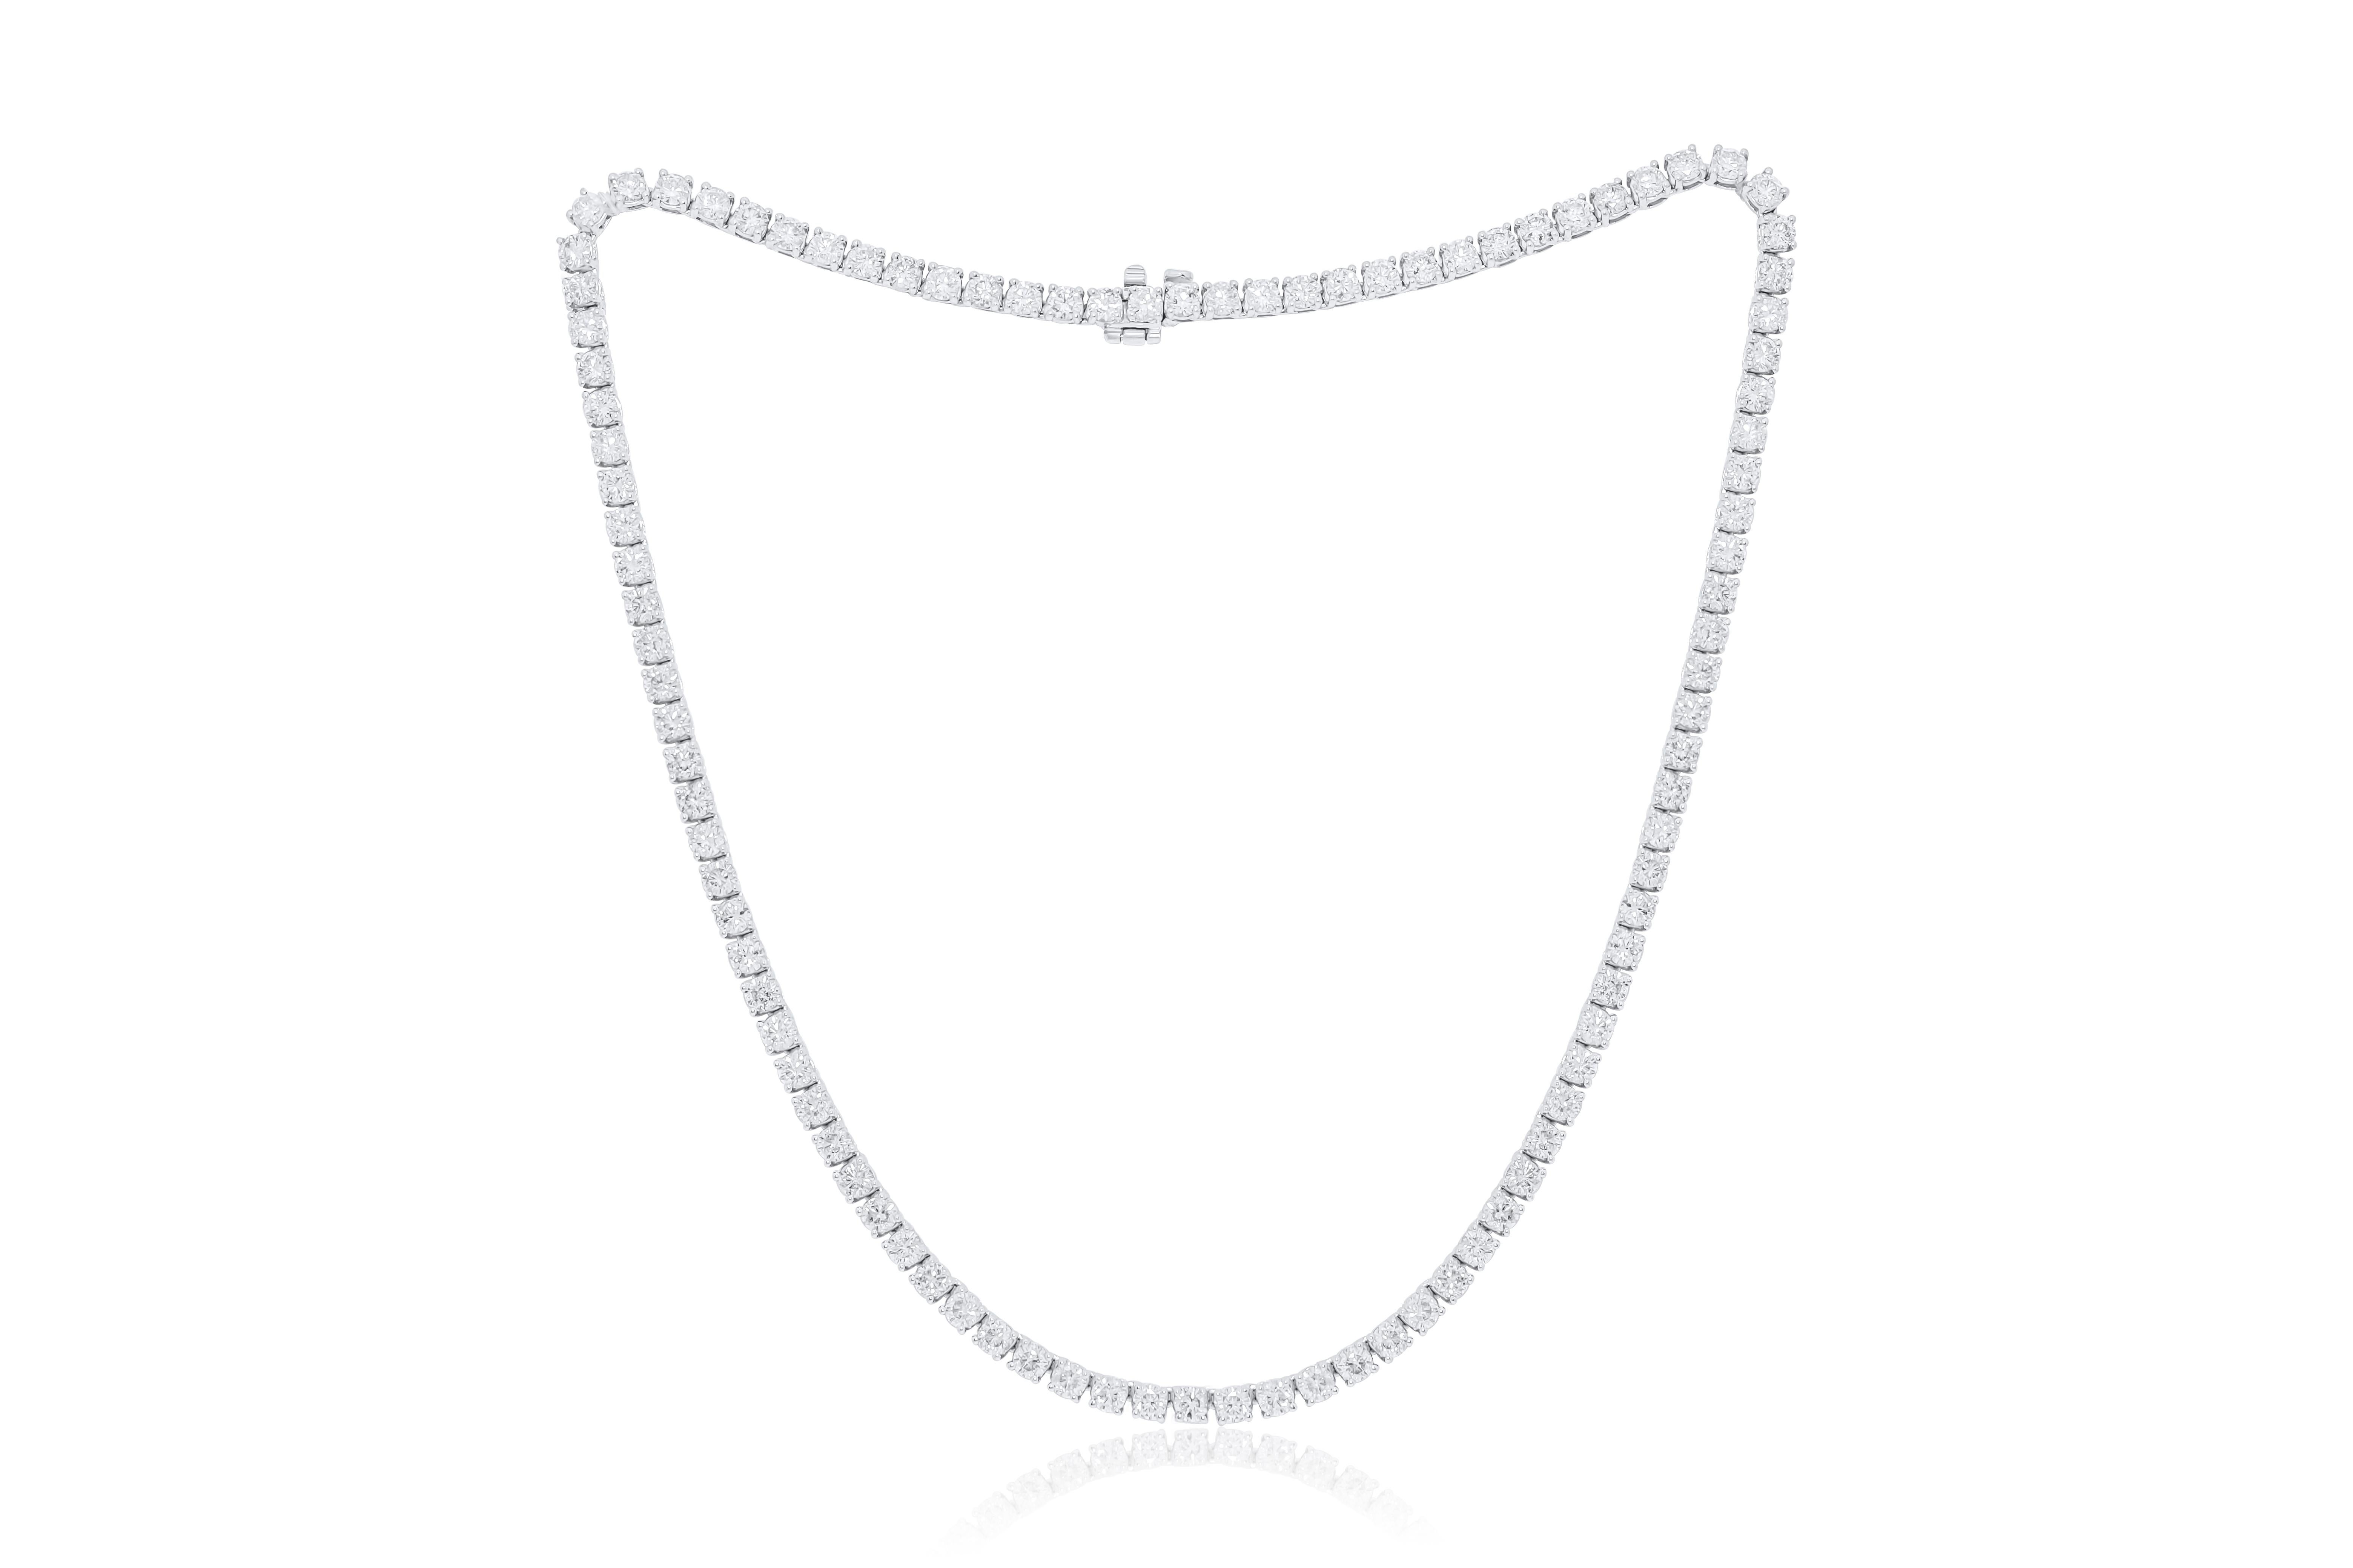 Modern Diana M. Jewels Custom18 kt  White Gold 4 Prong Diamond Tennis Necklace 23.05ct For Sale